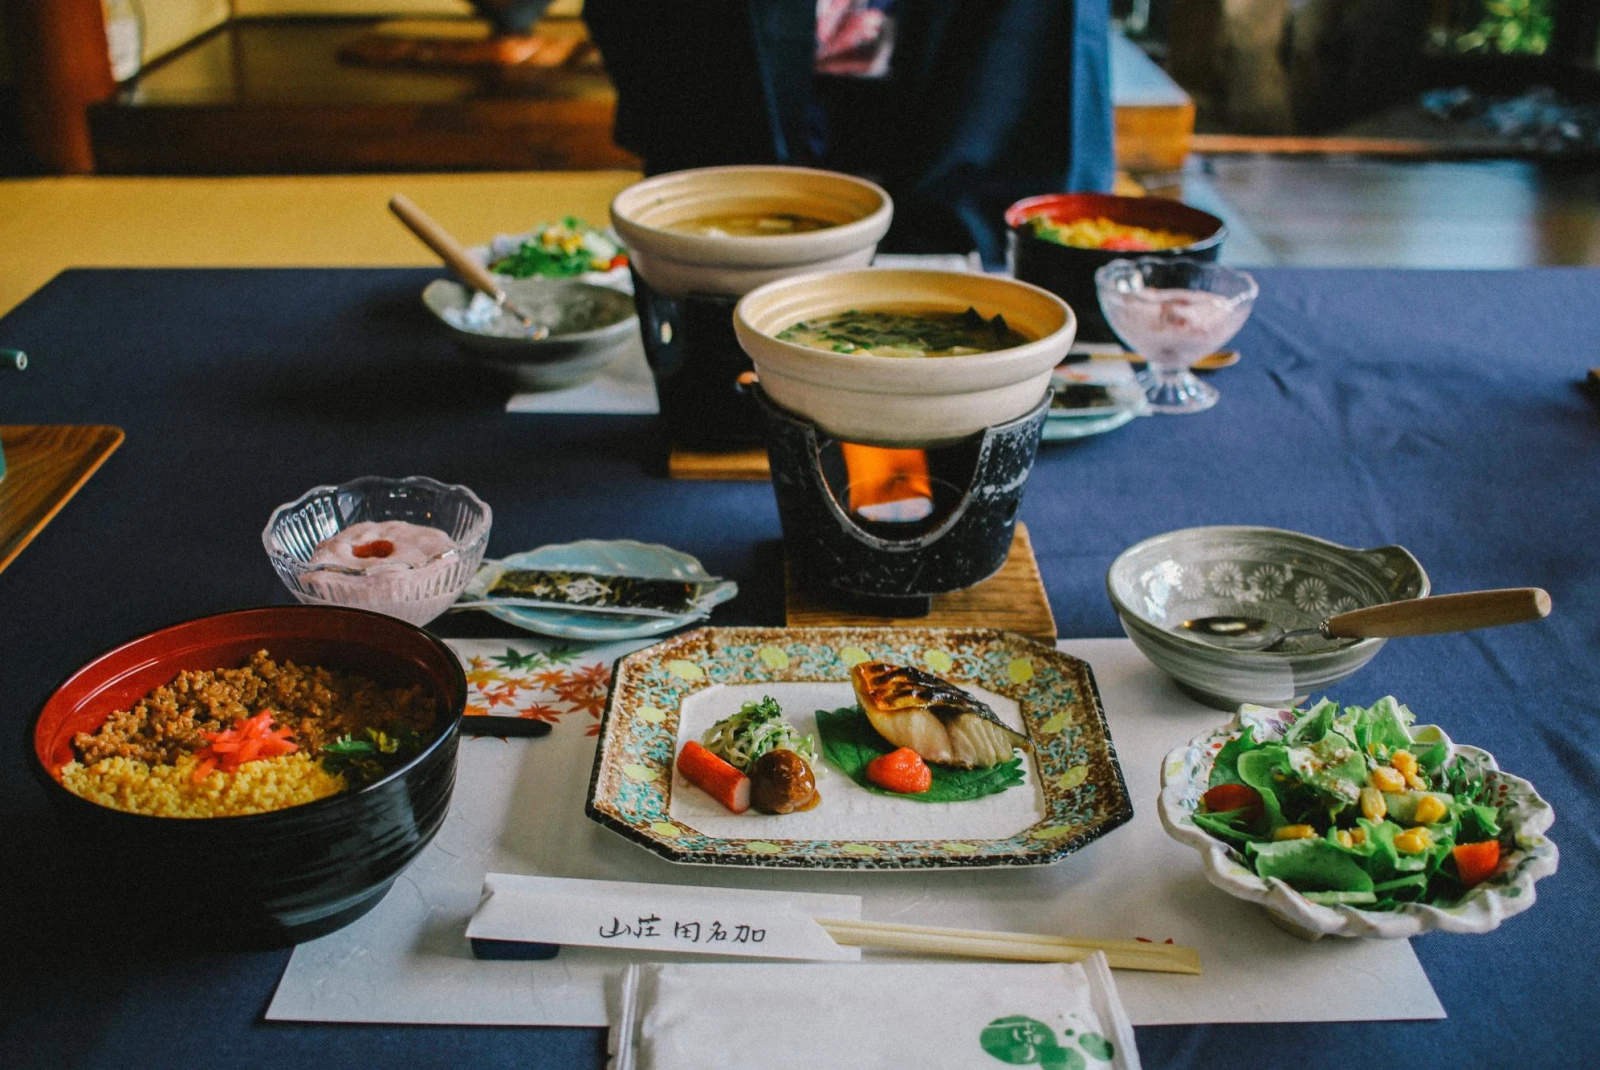 traditional Japanese tea meal with multiple dishes on a wooden table  